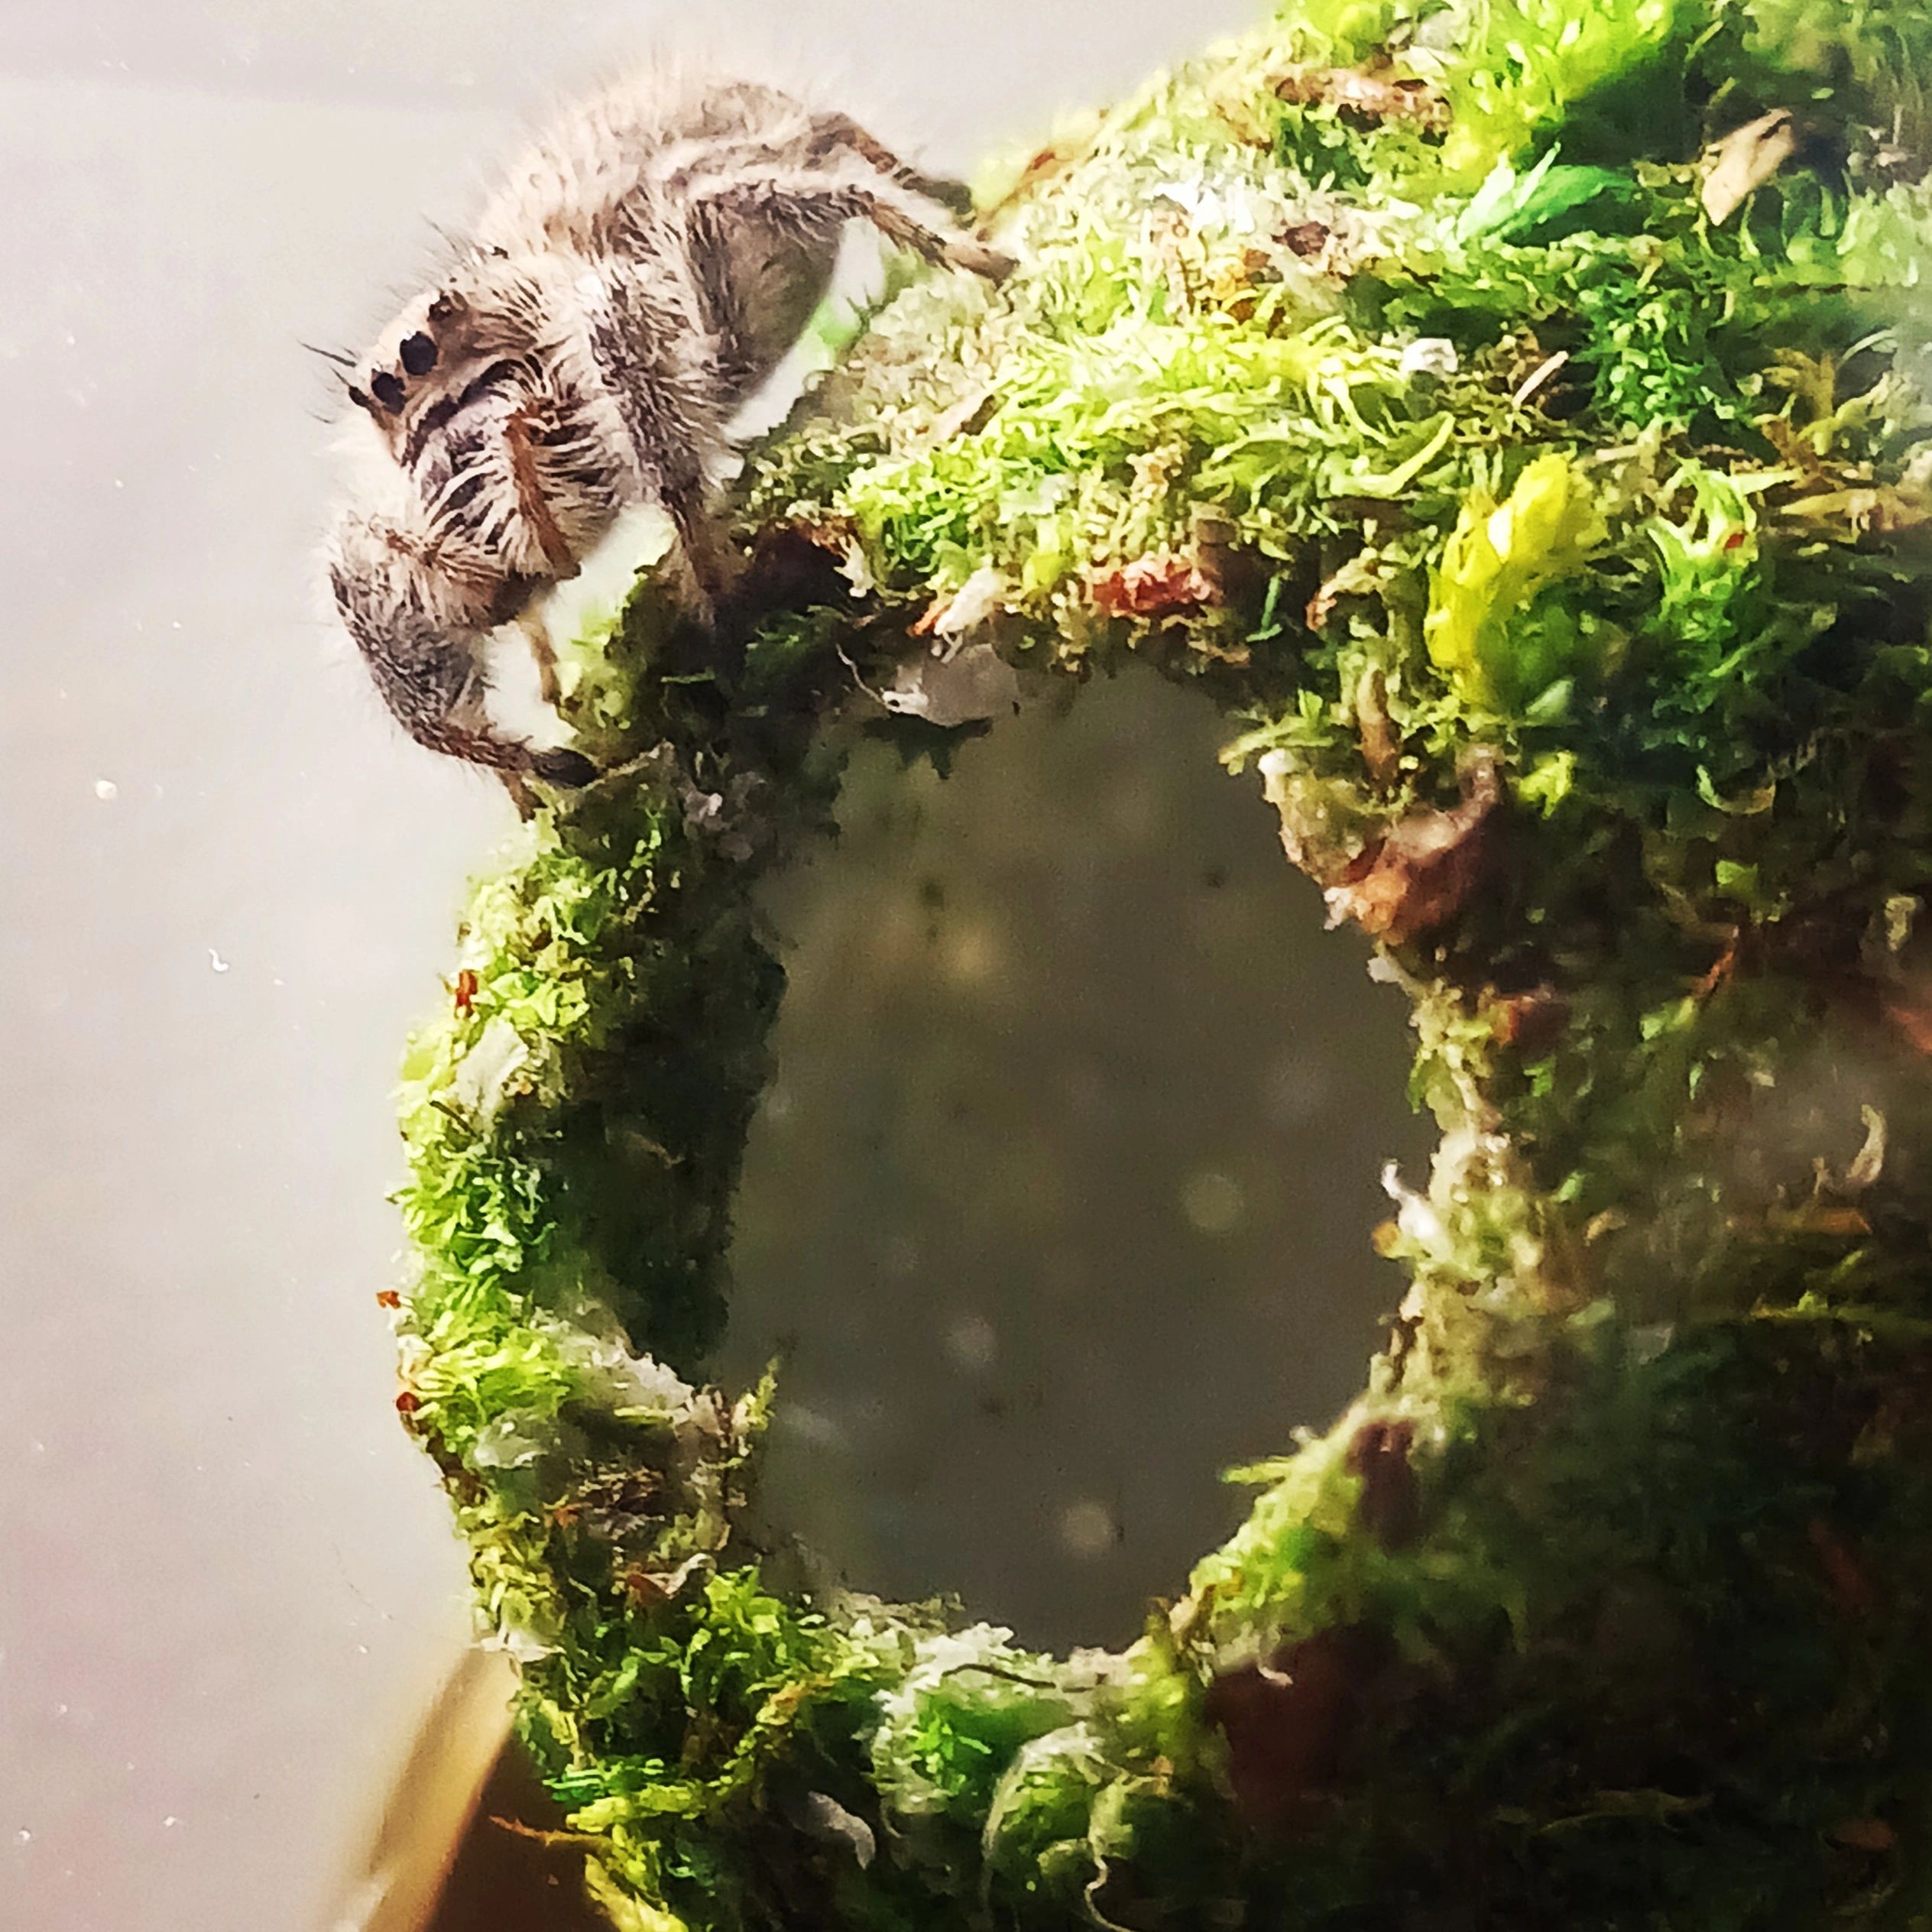 Jumping Spiders Are the Cutest, and You Can Catch Your Own